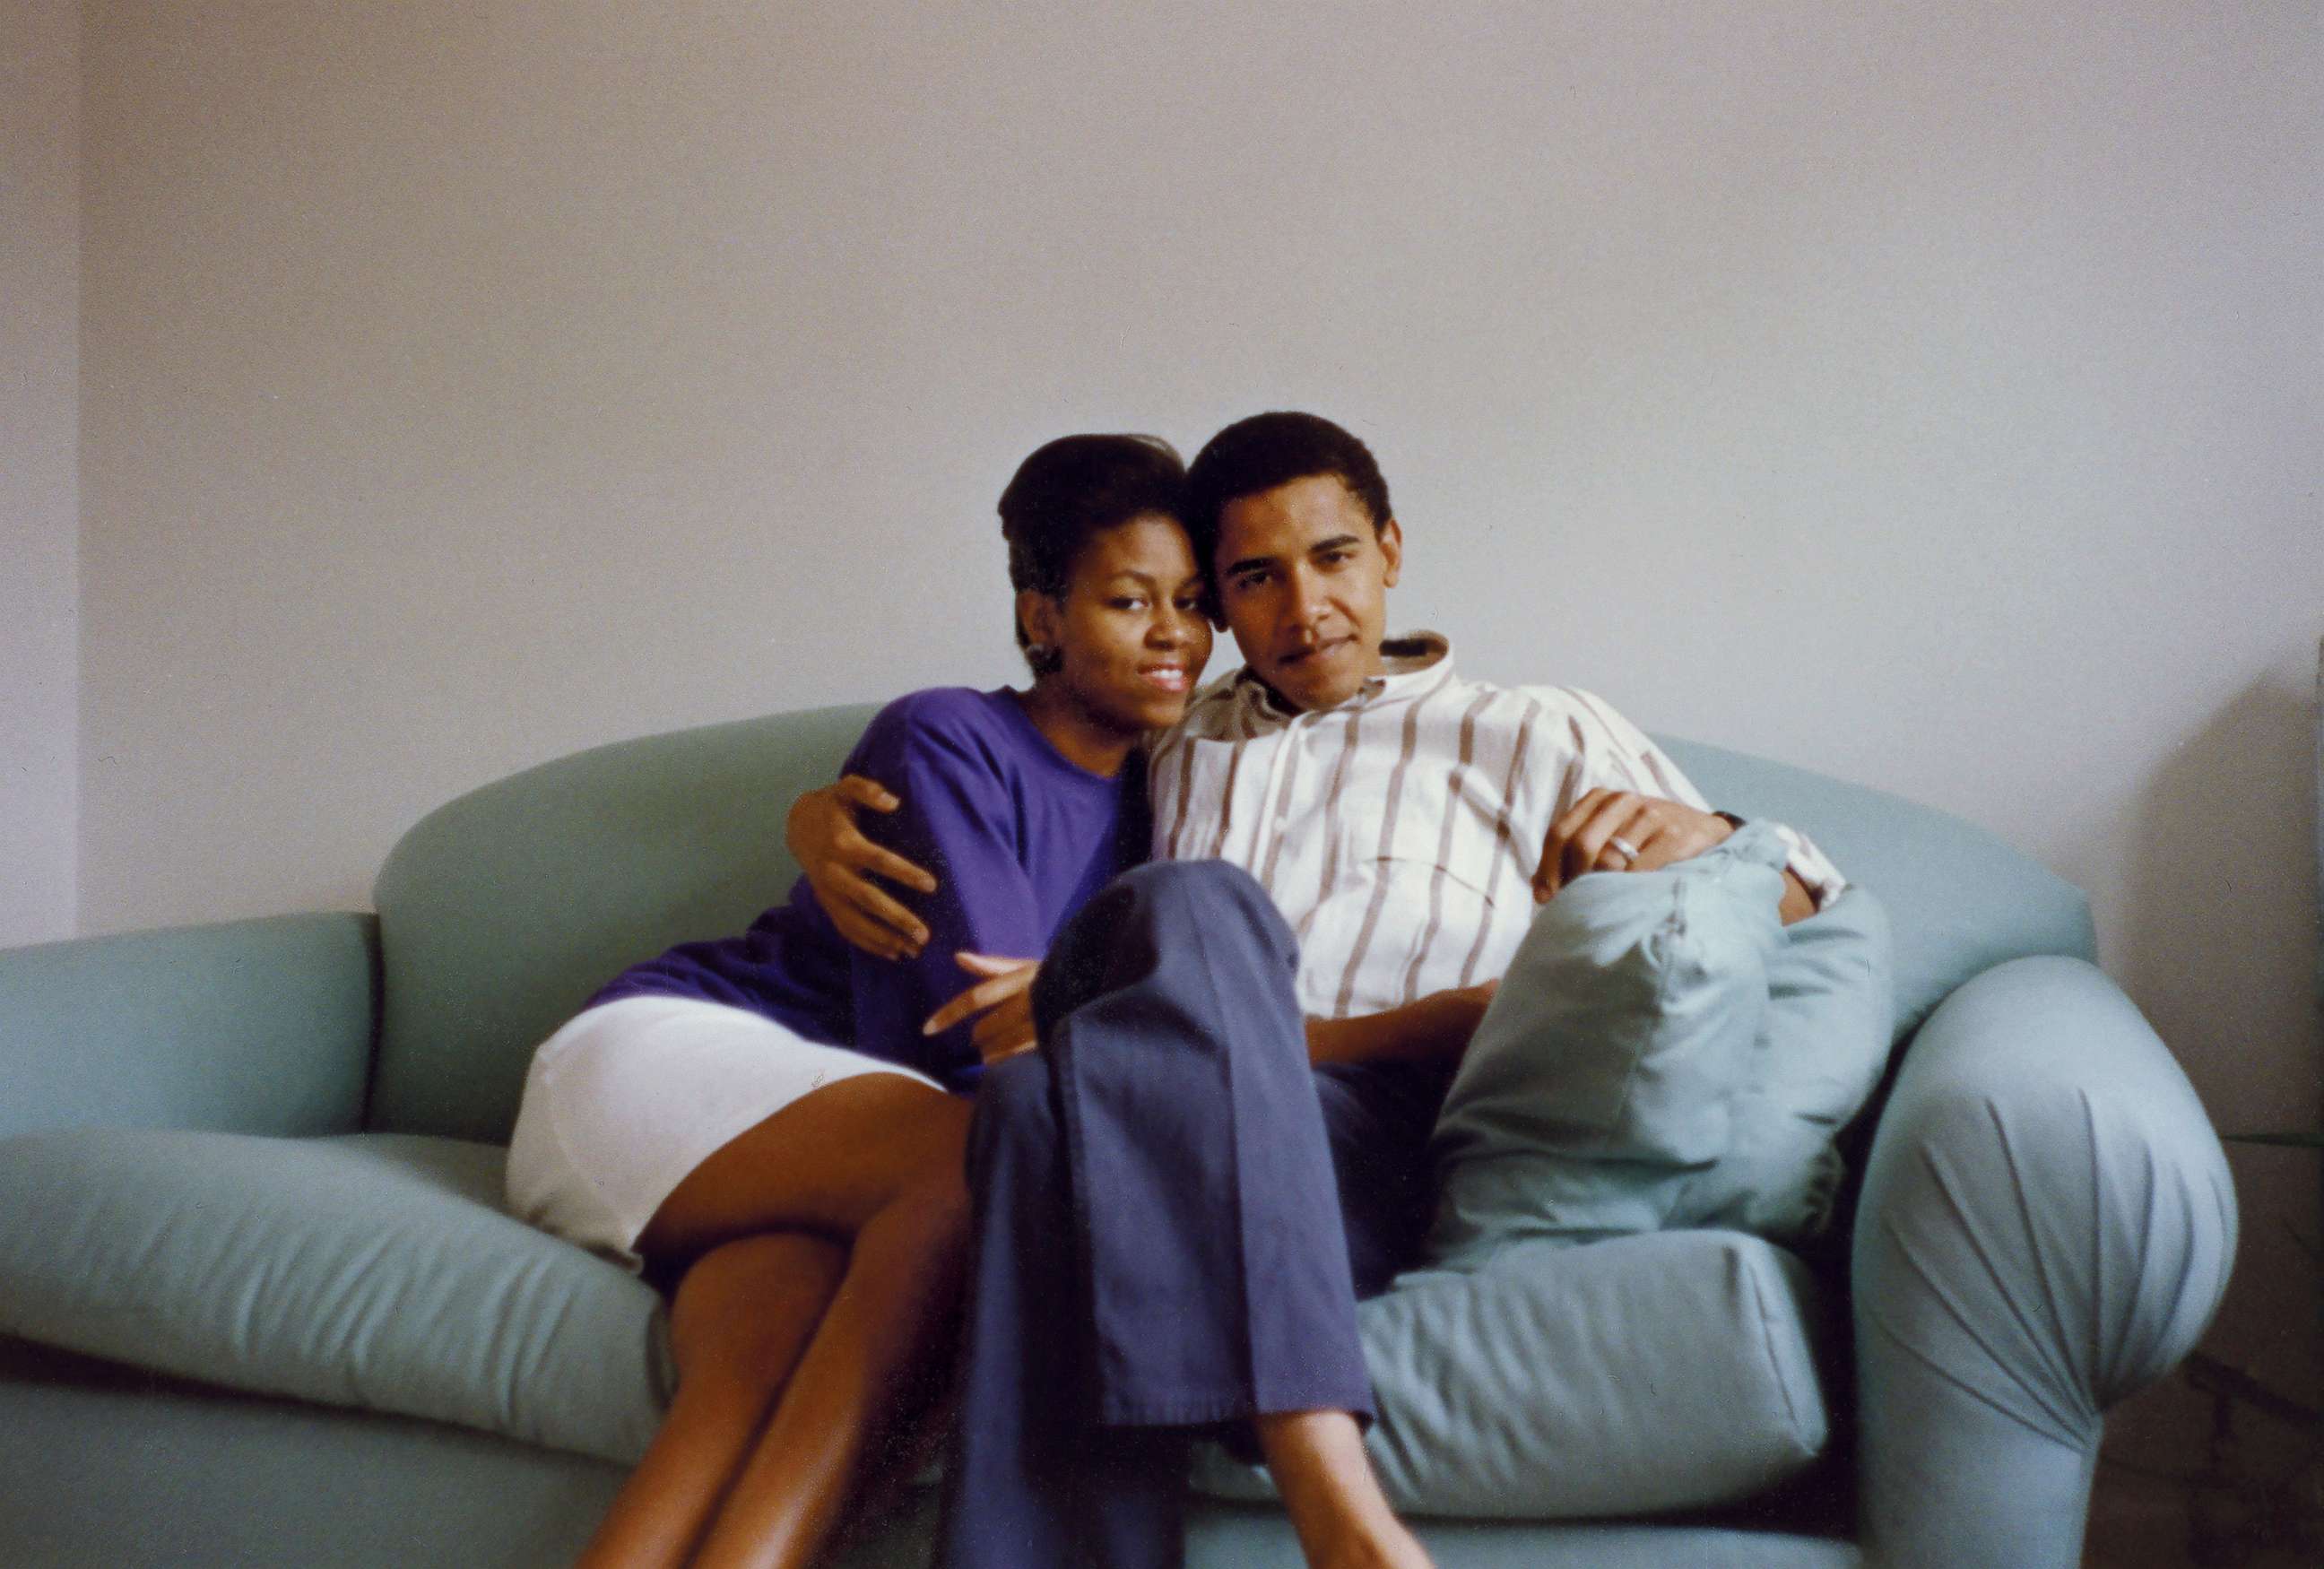 PHOTO: Michelle and Barack Obama as a young couple.